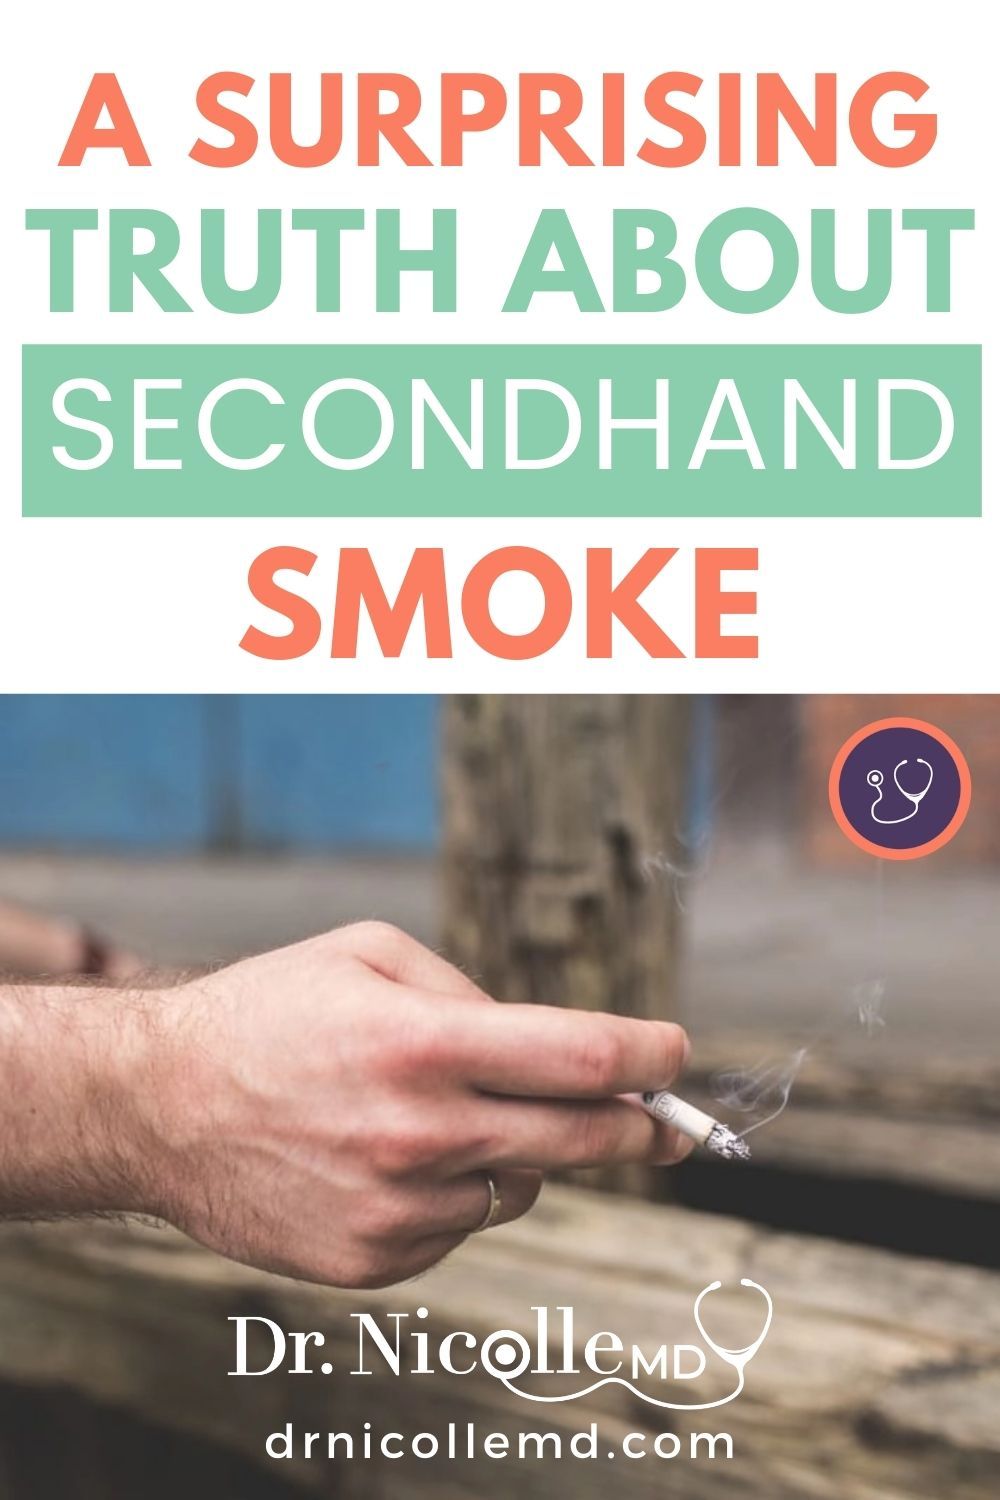 A Surprising Truth About Secondhand Smoke